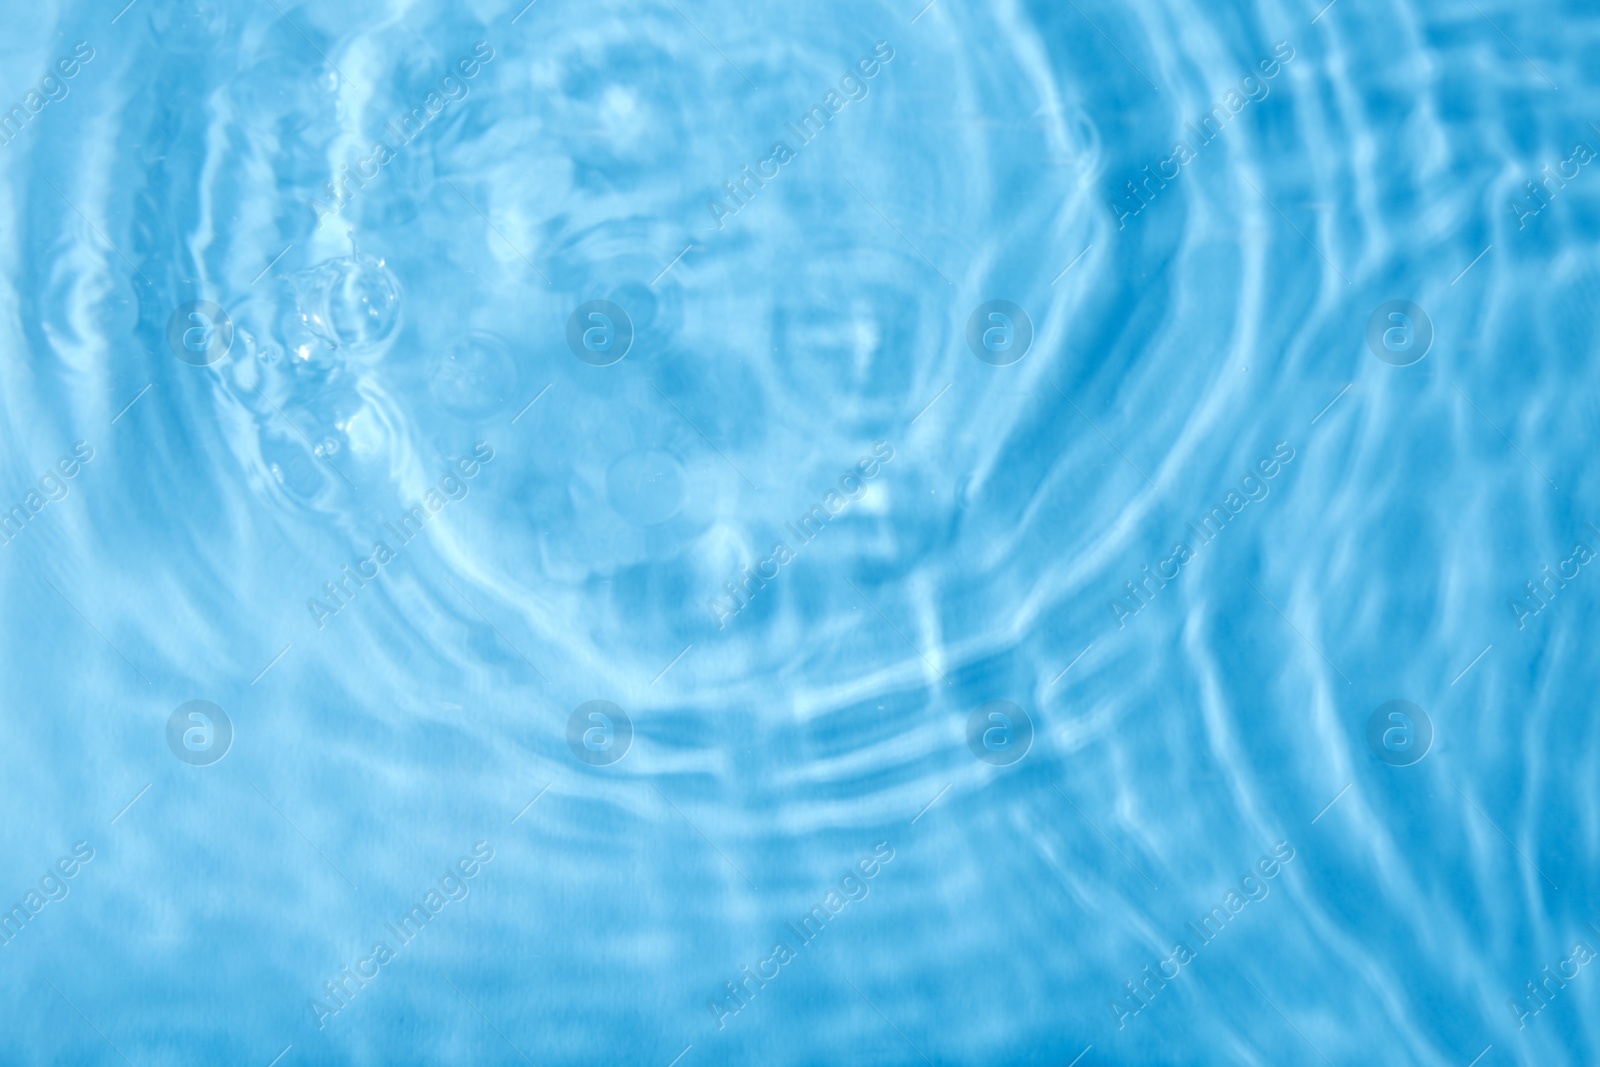 Photo of Concentric waves on blue water surface after falling drops, top view